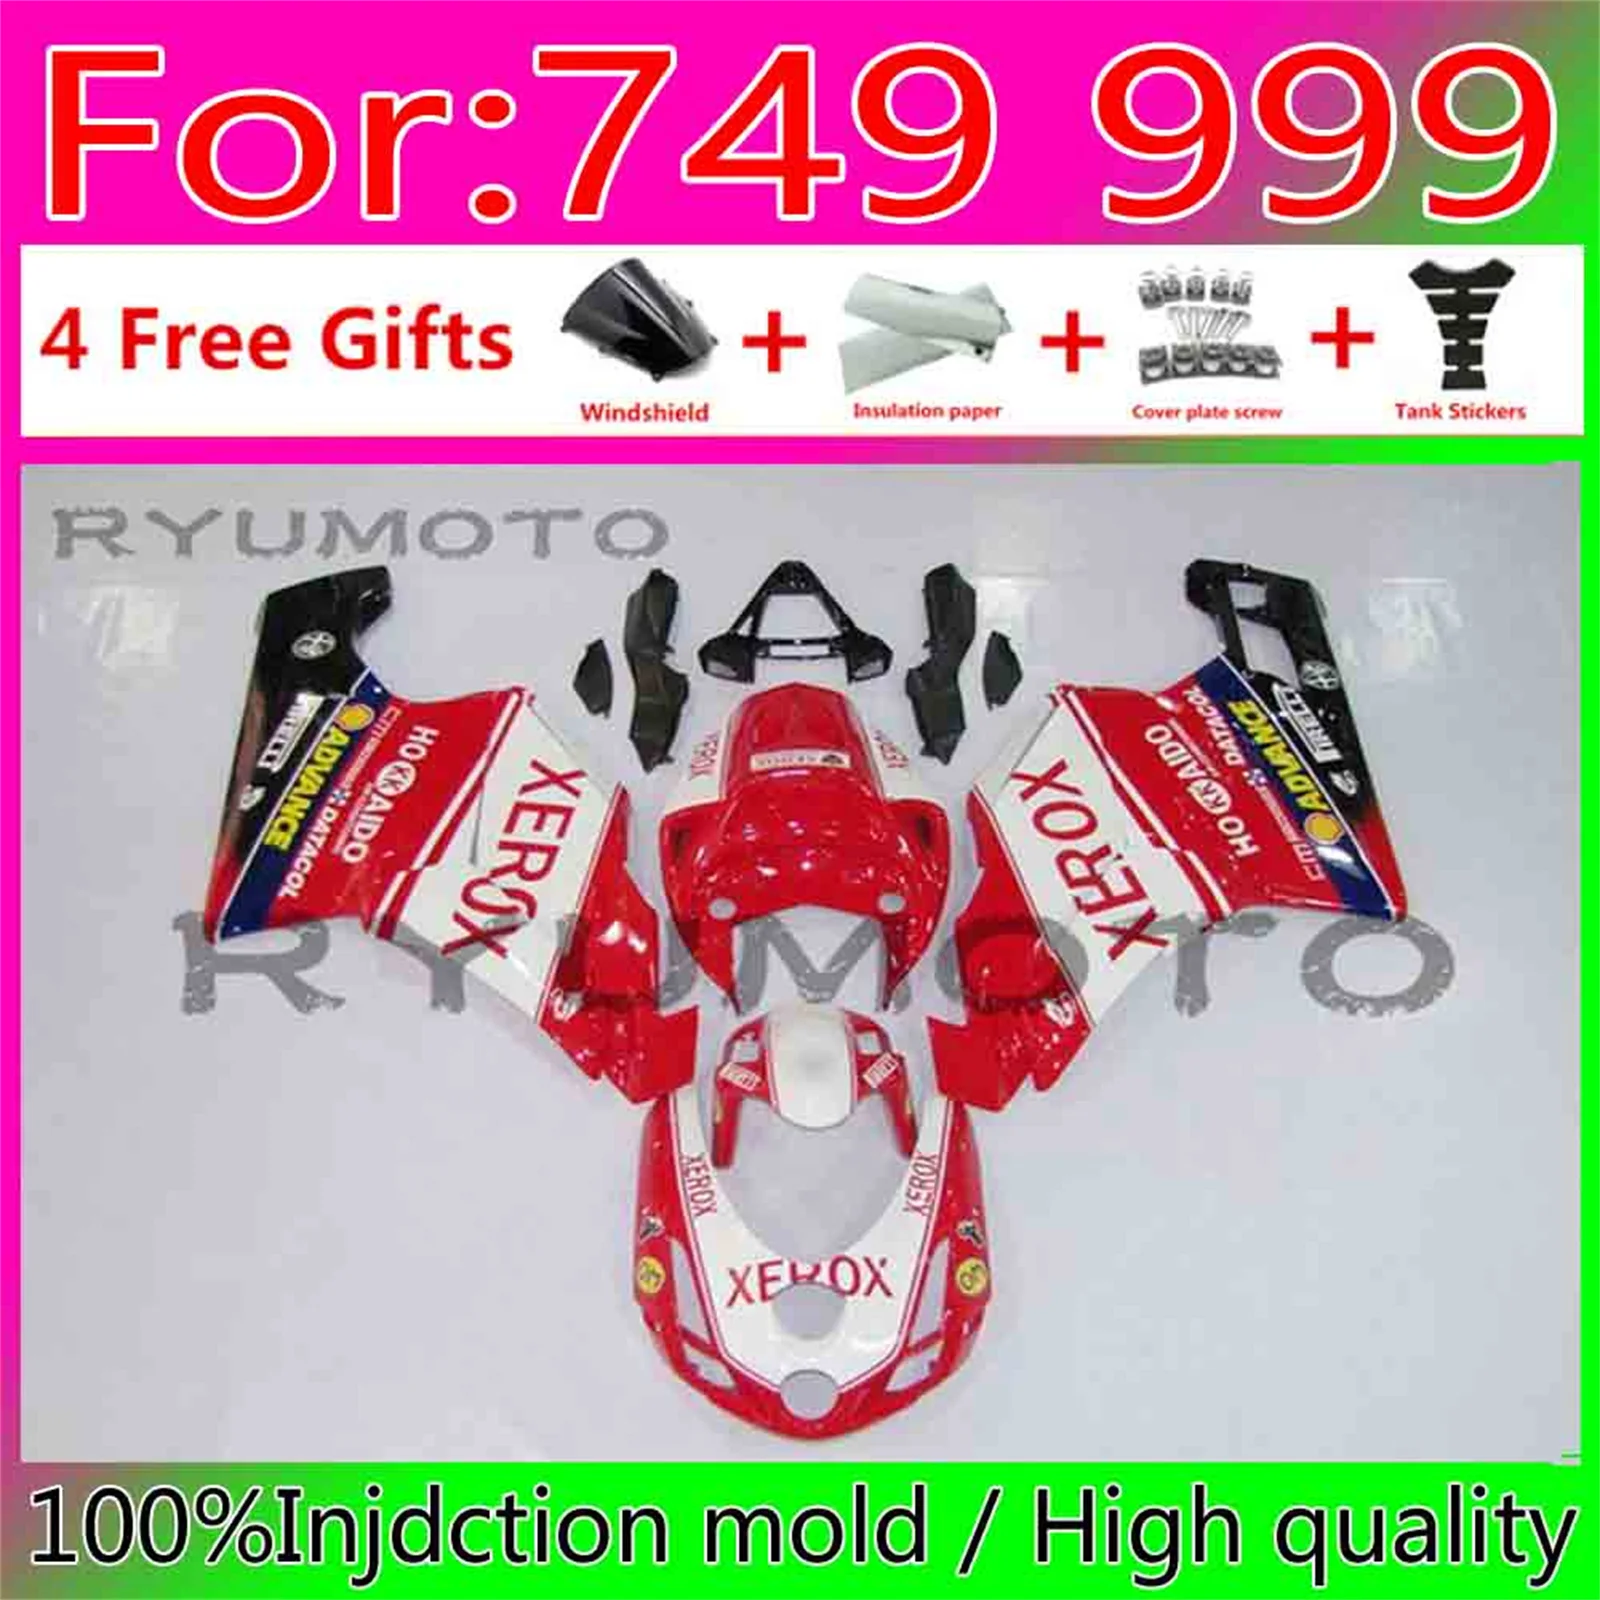 

New ABS Motorcycle Injection Mold Fairing Kit Fit For Ducati 749 999 03 04 05 2003 2004 2005 06 Bodywork Fairings red